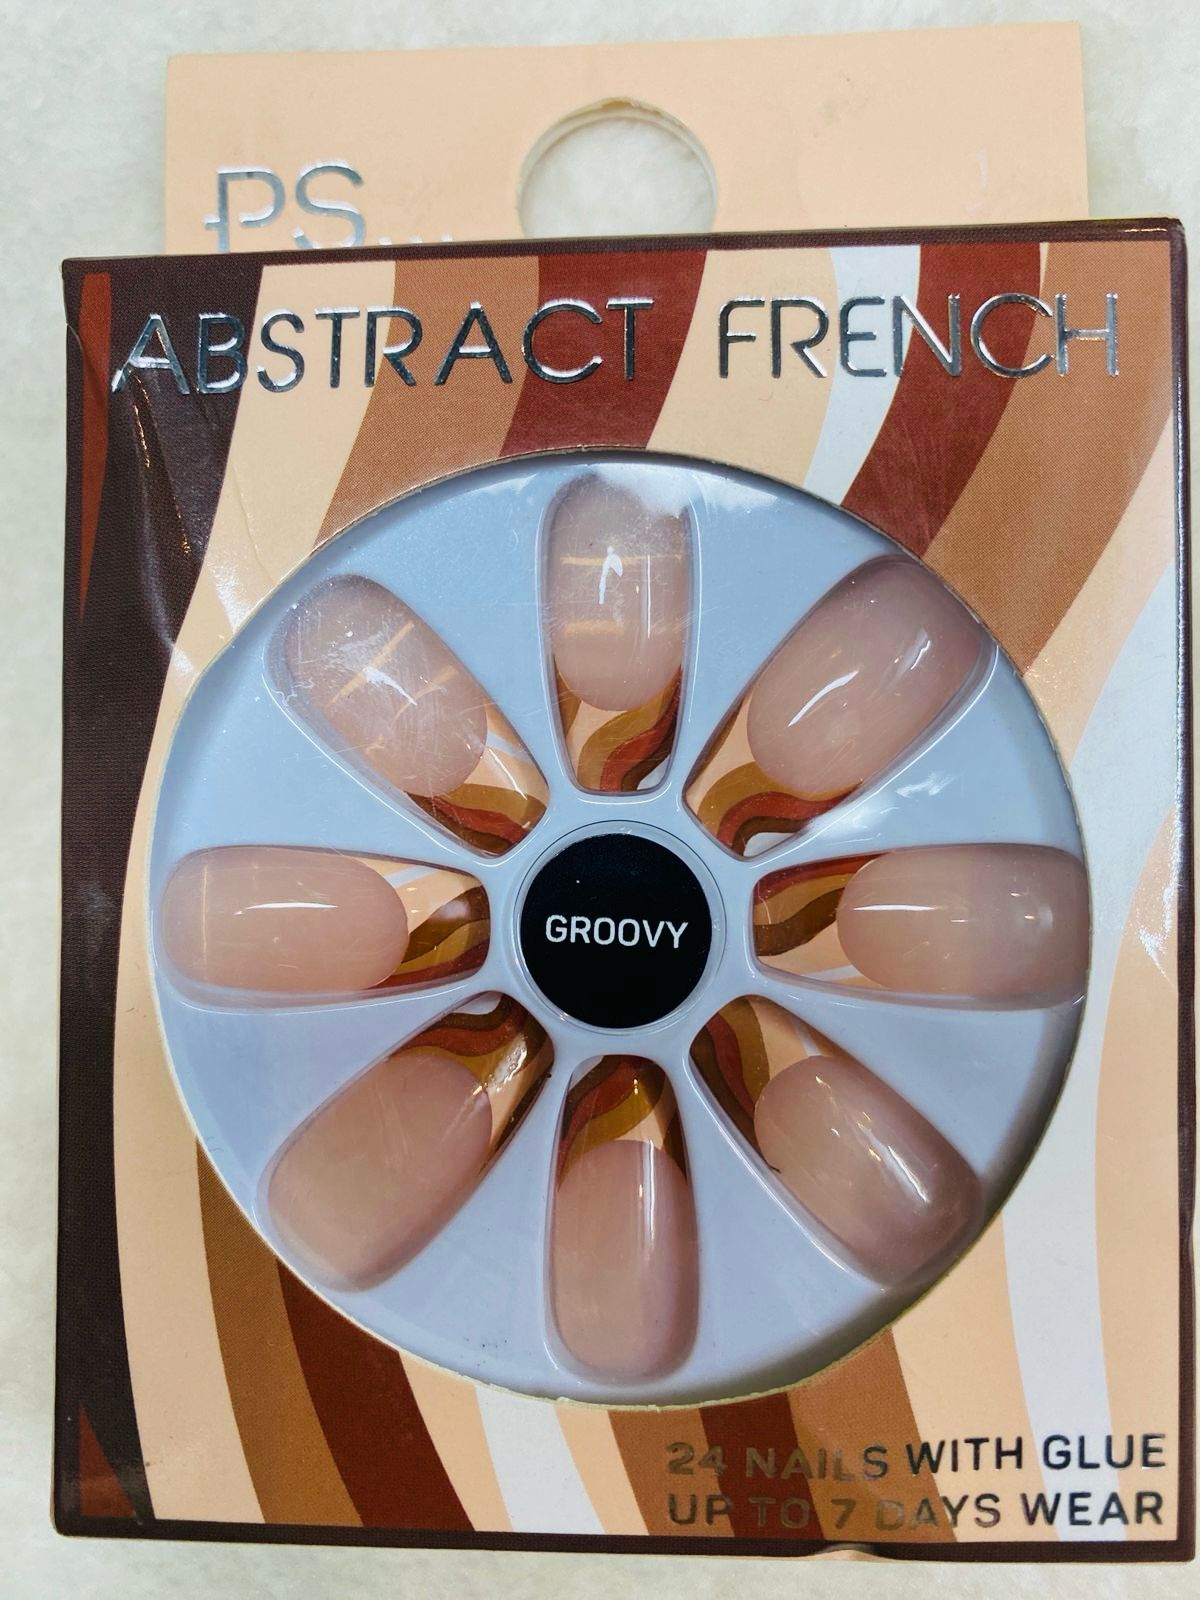 Acetract French nails